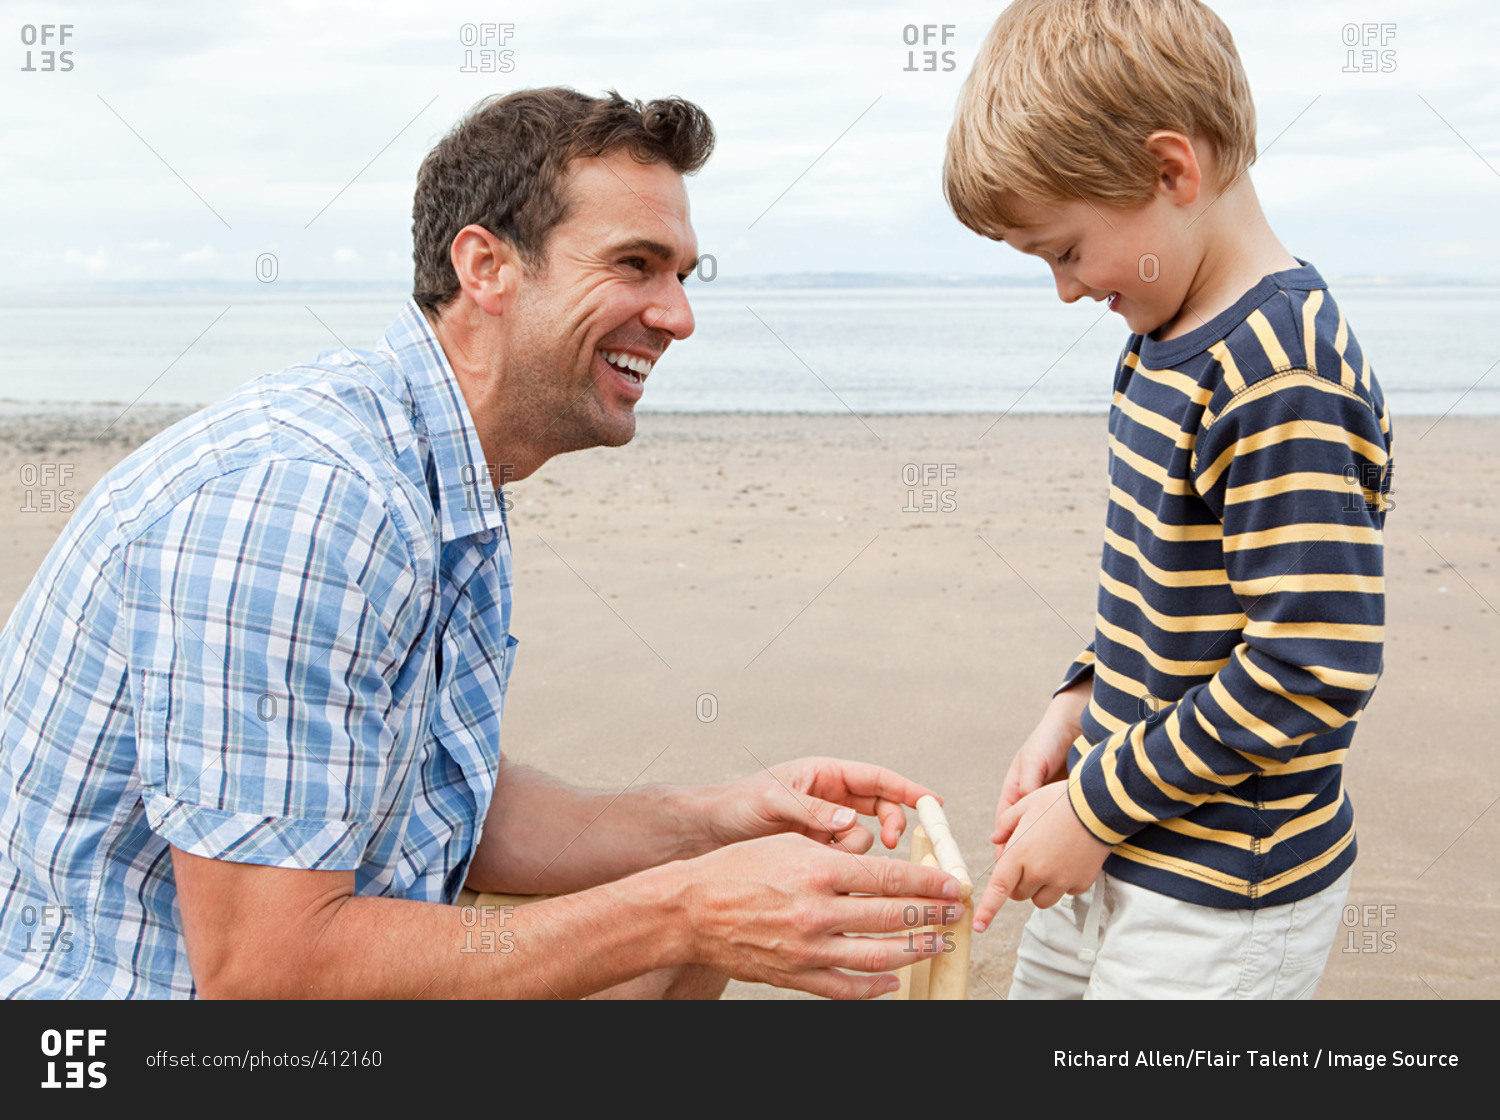 Father and son on beach with cricket stumps